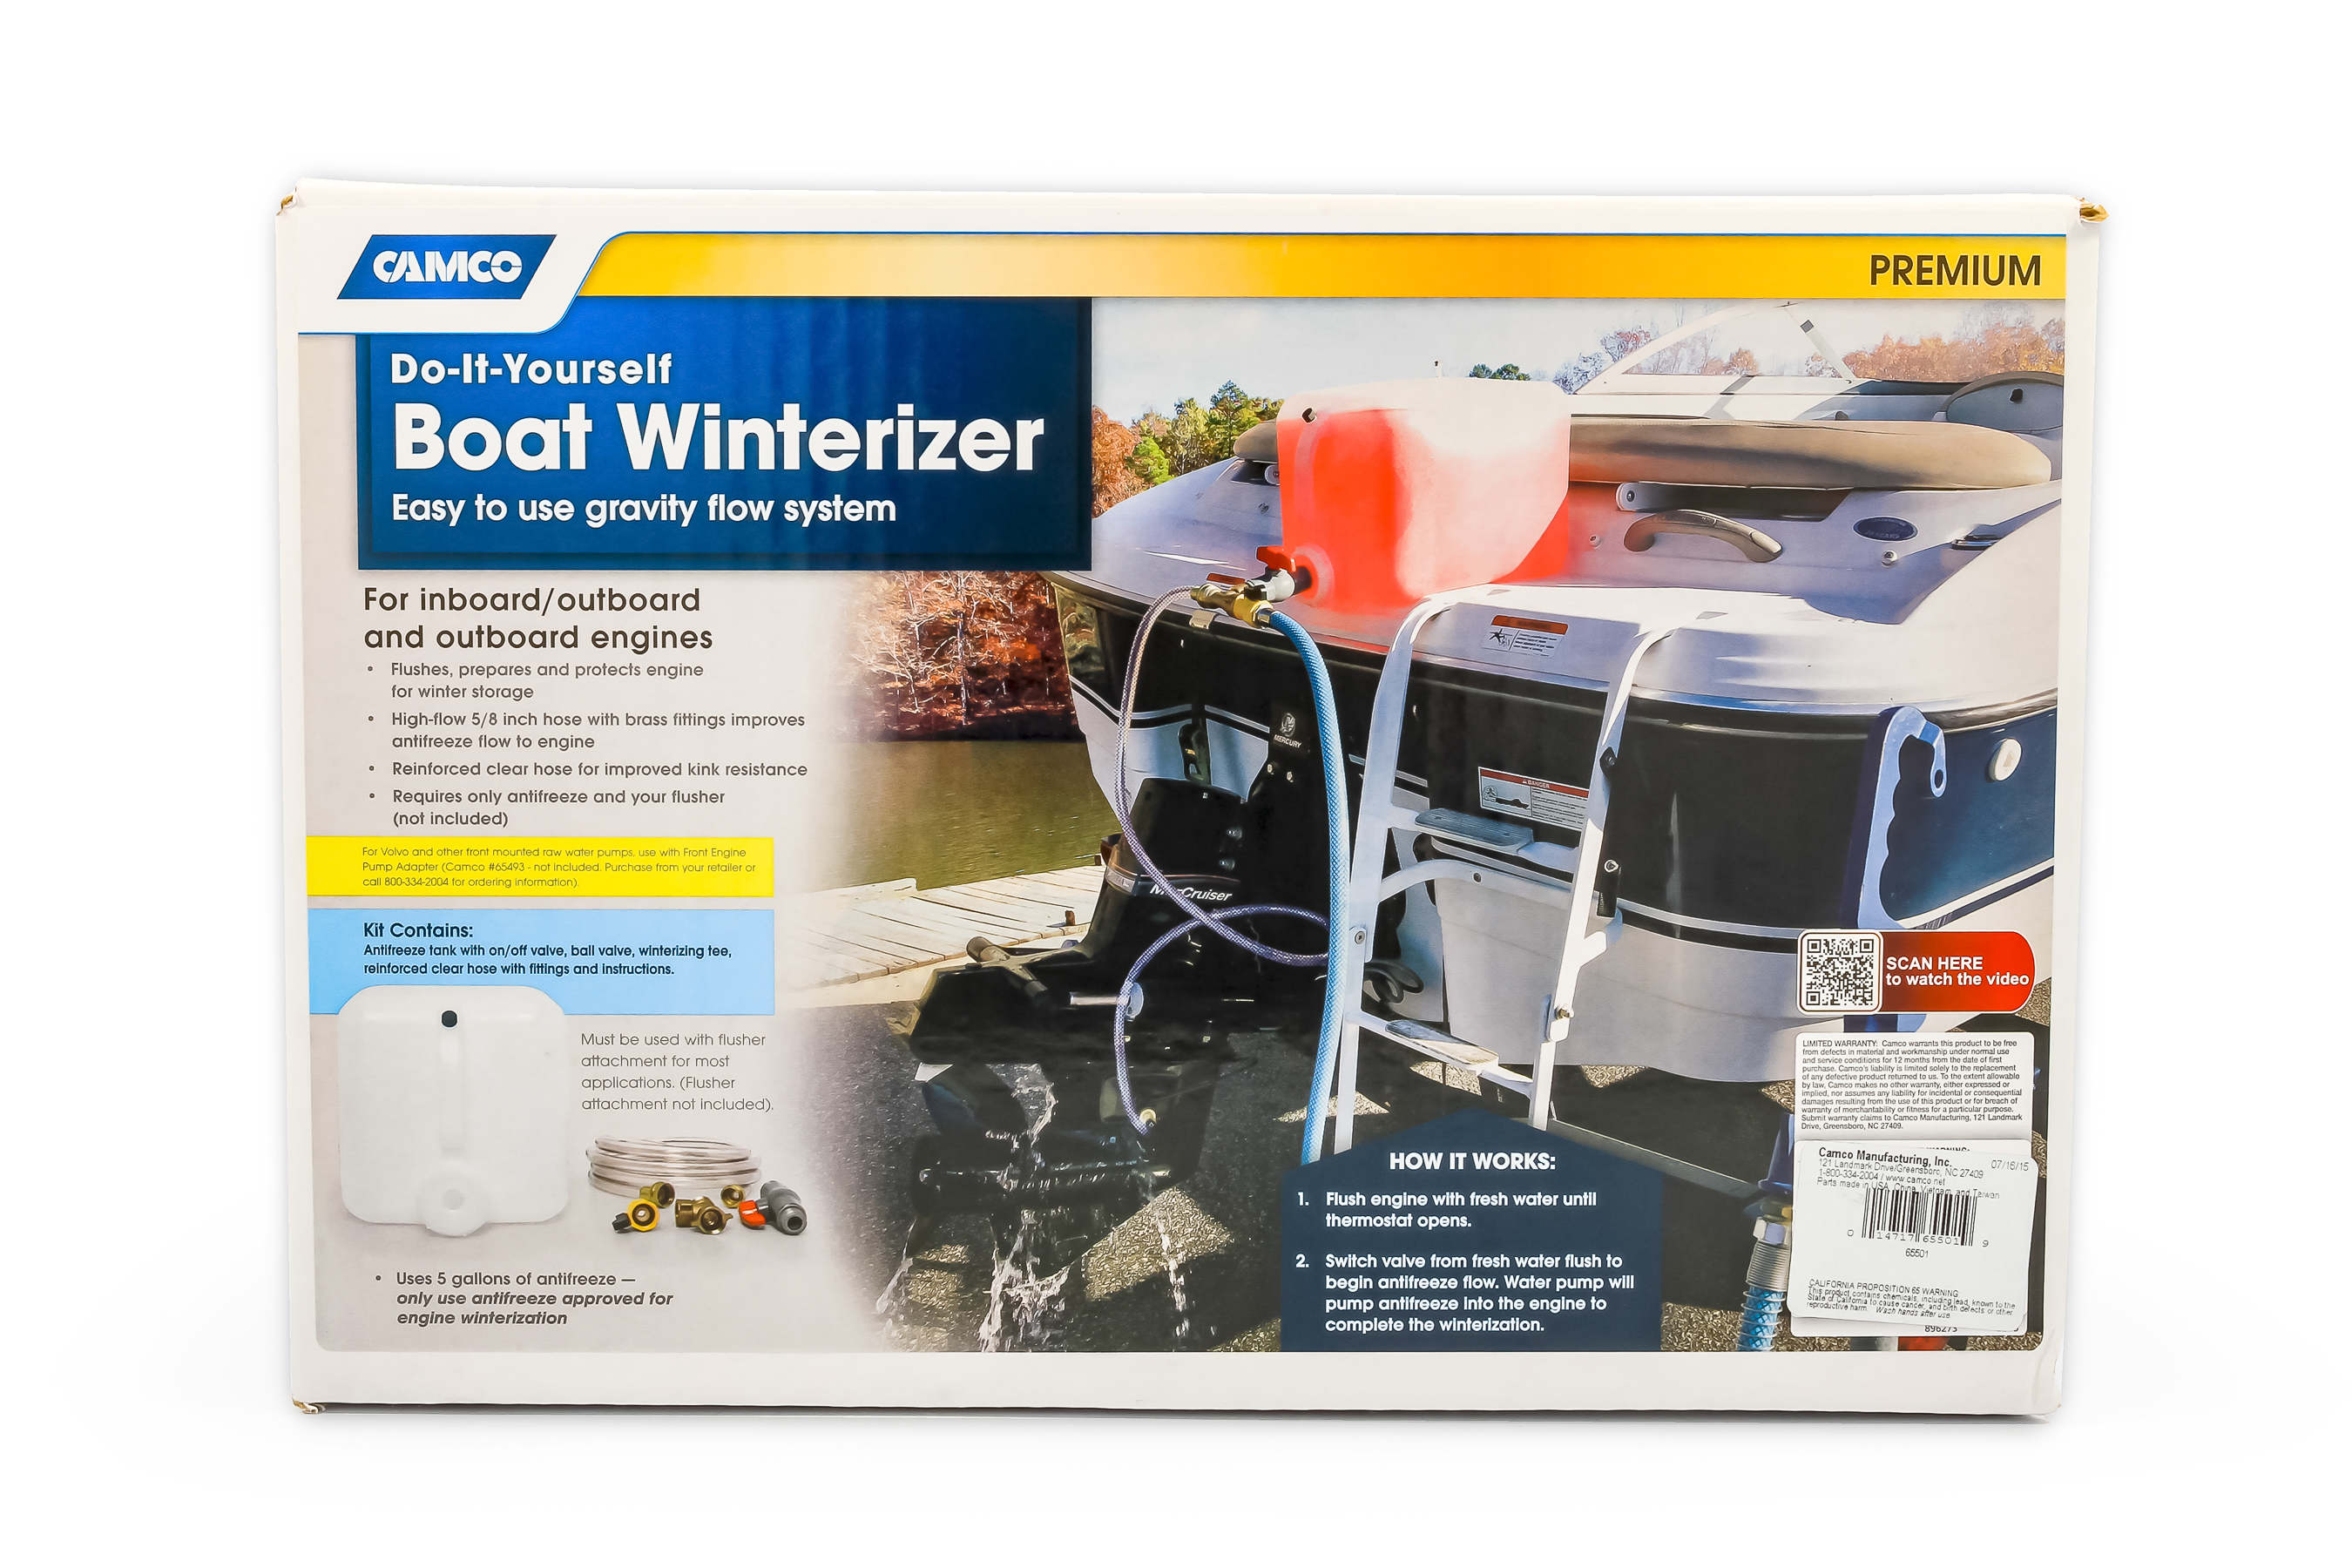 Camco 65501 DIY Boat Winterizer - Easy to Use Gravity Flow System for Inboard/Outboard Engines - image 3 of 18